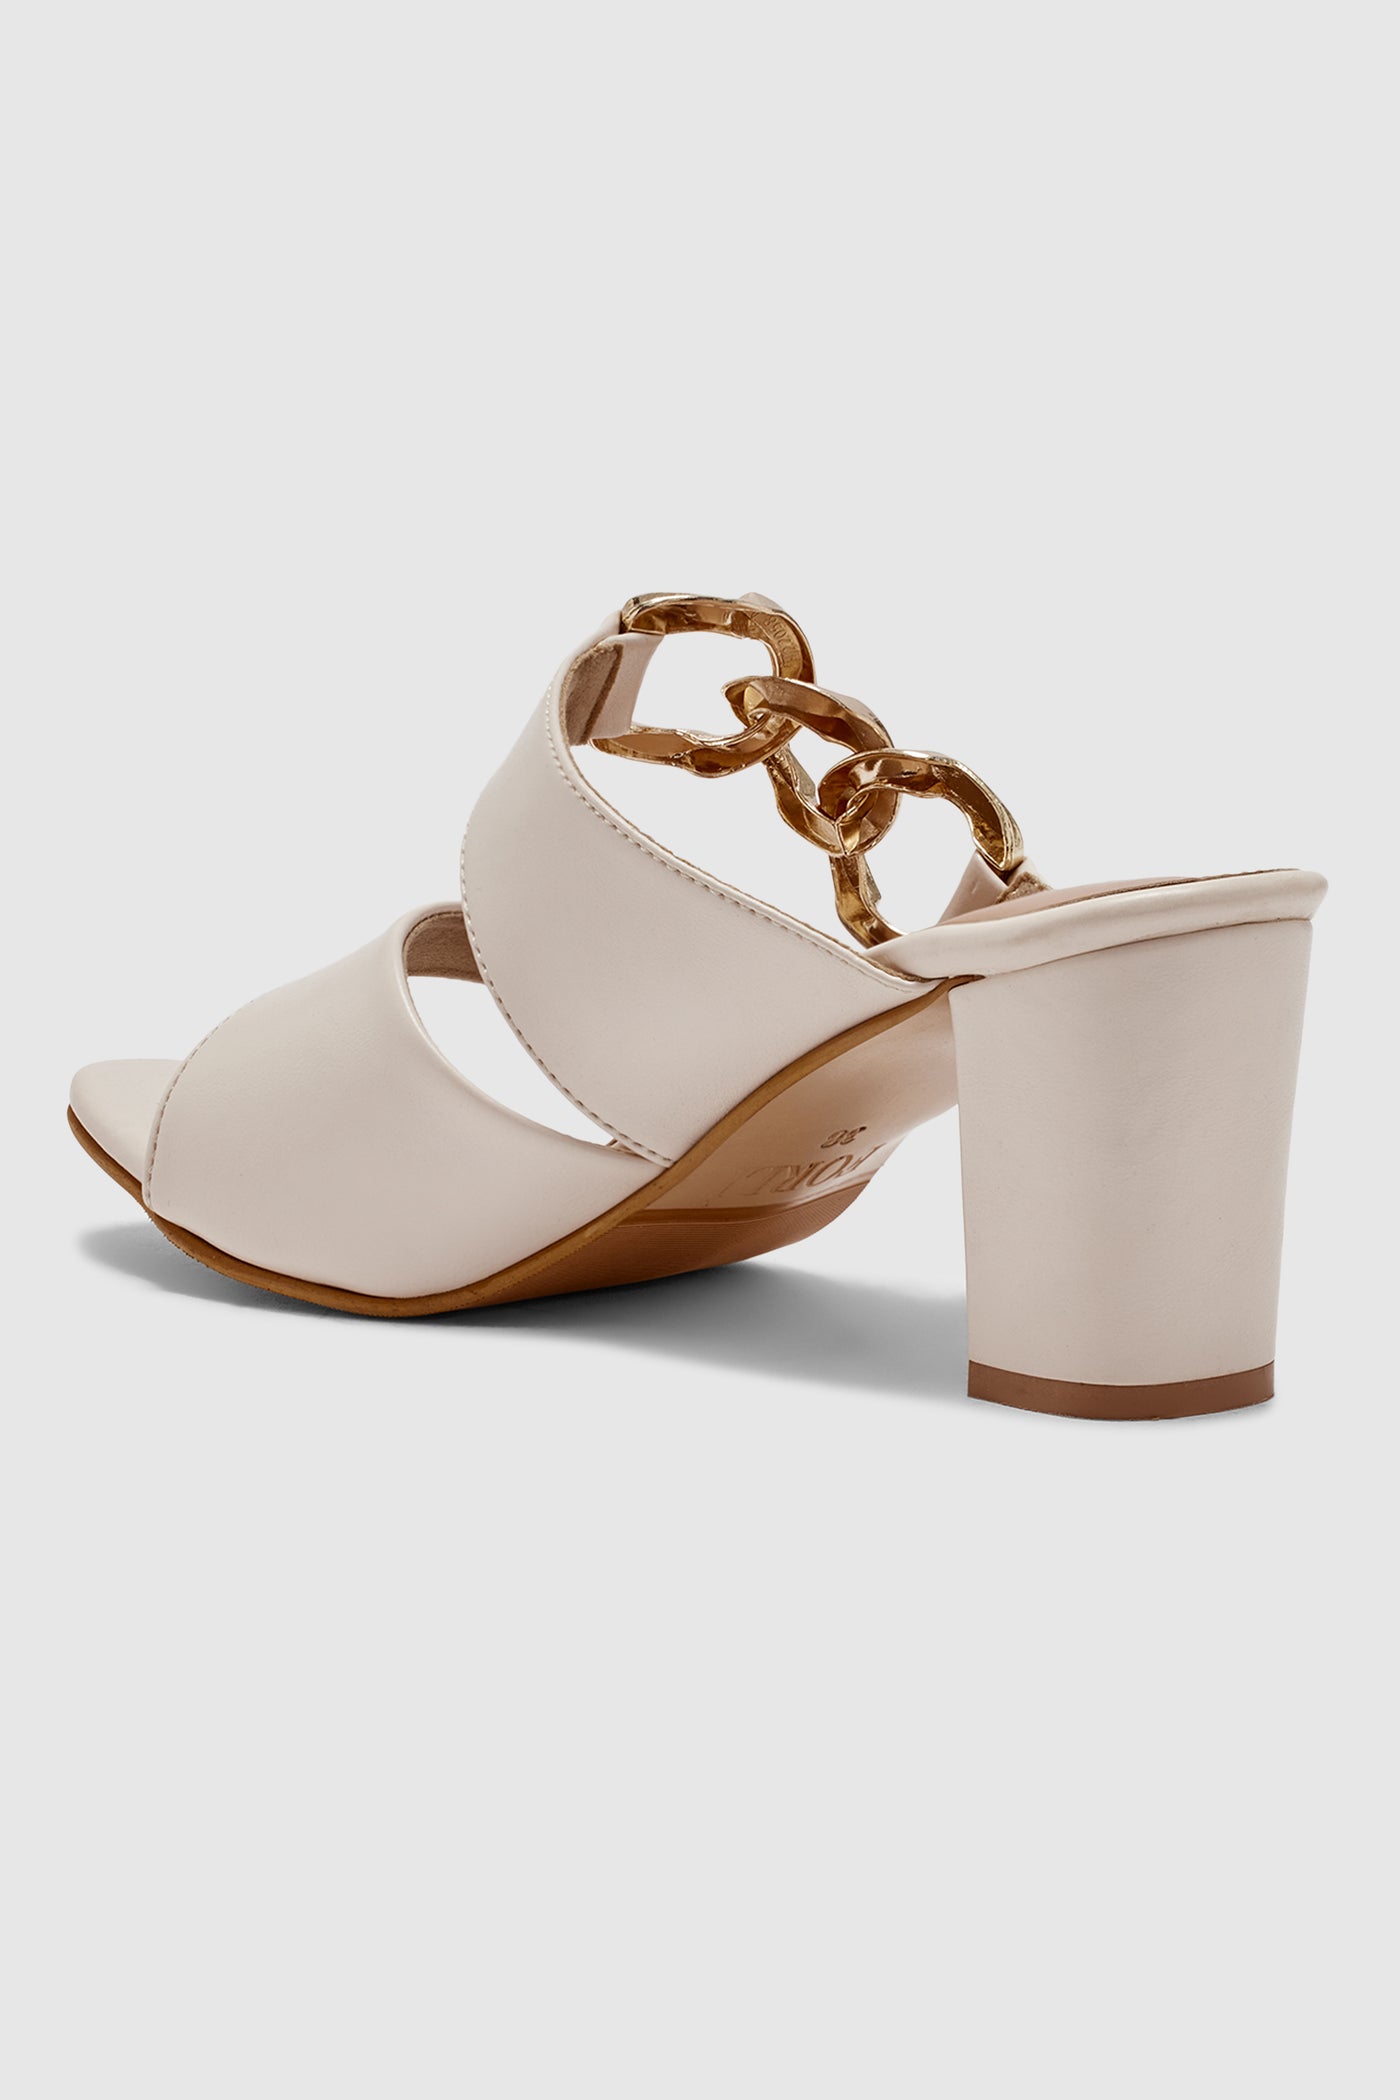 Azura Tan Leather Sandals- back view